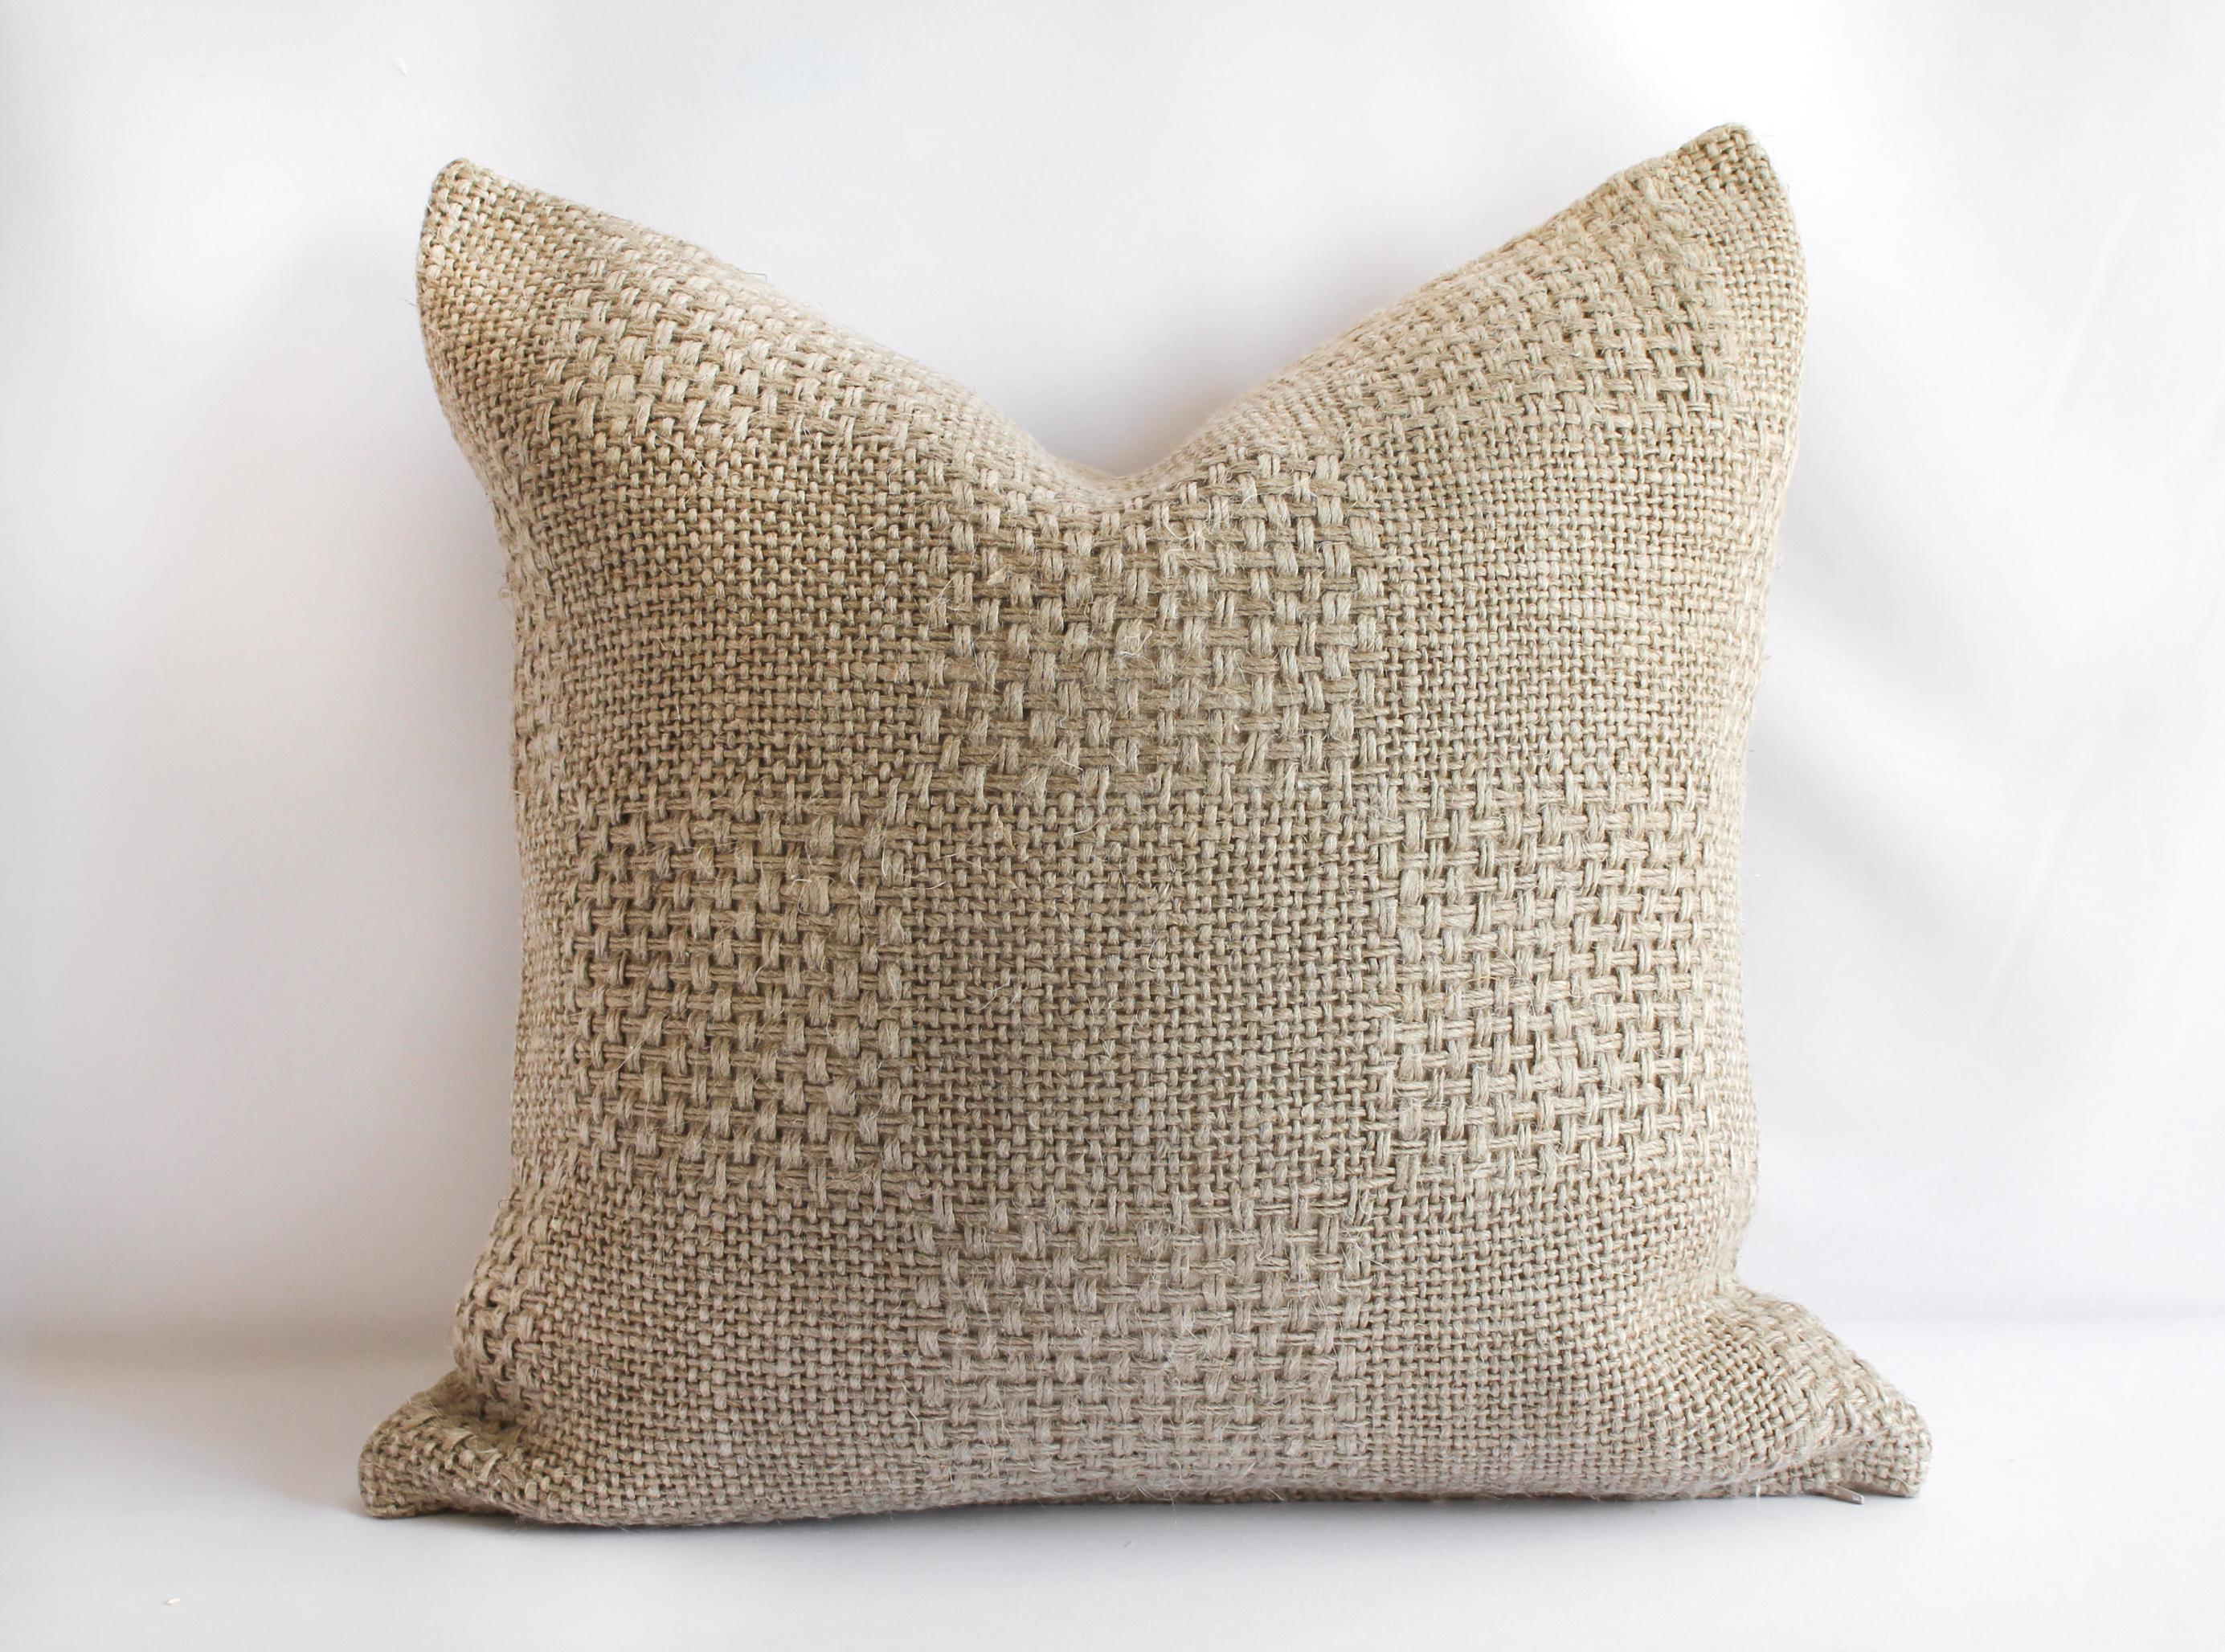 100% Belgian natural linen decorative accent pillow with a large woven pattern. One of favorite pillows with its unique weaving.
Extremely soft hand, zipper closure, overlocked edges and finished in a solid natural linen backing. Down insert can be